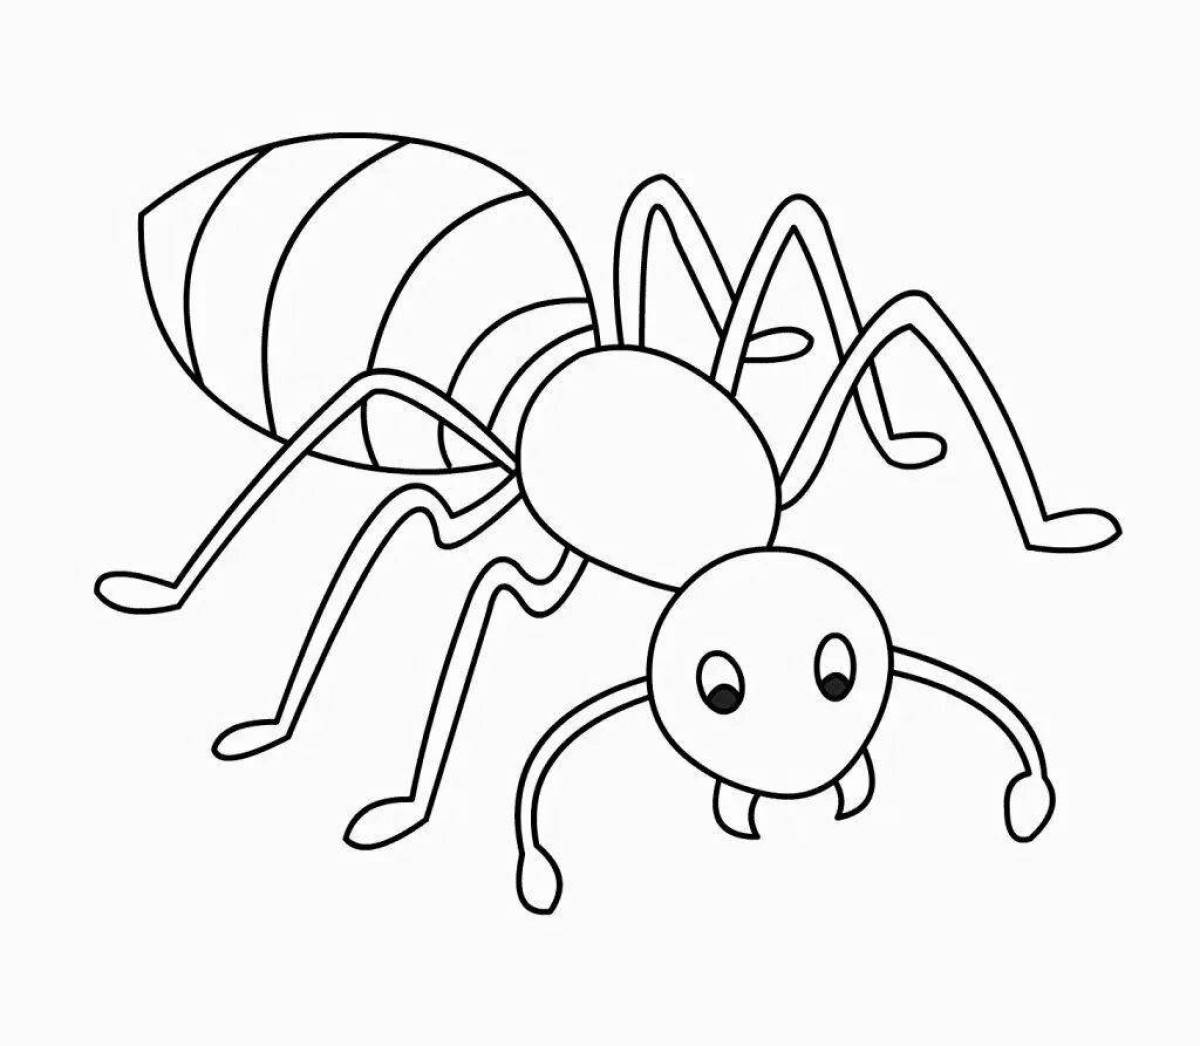 Funny drawing of an ant